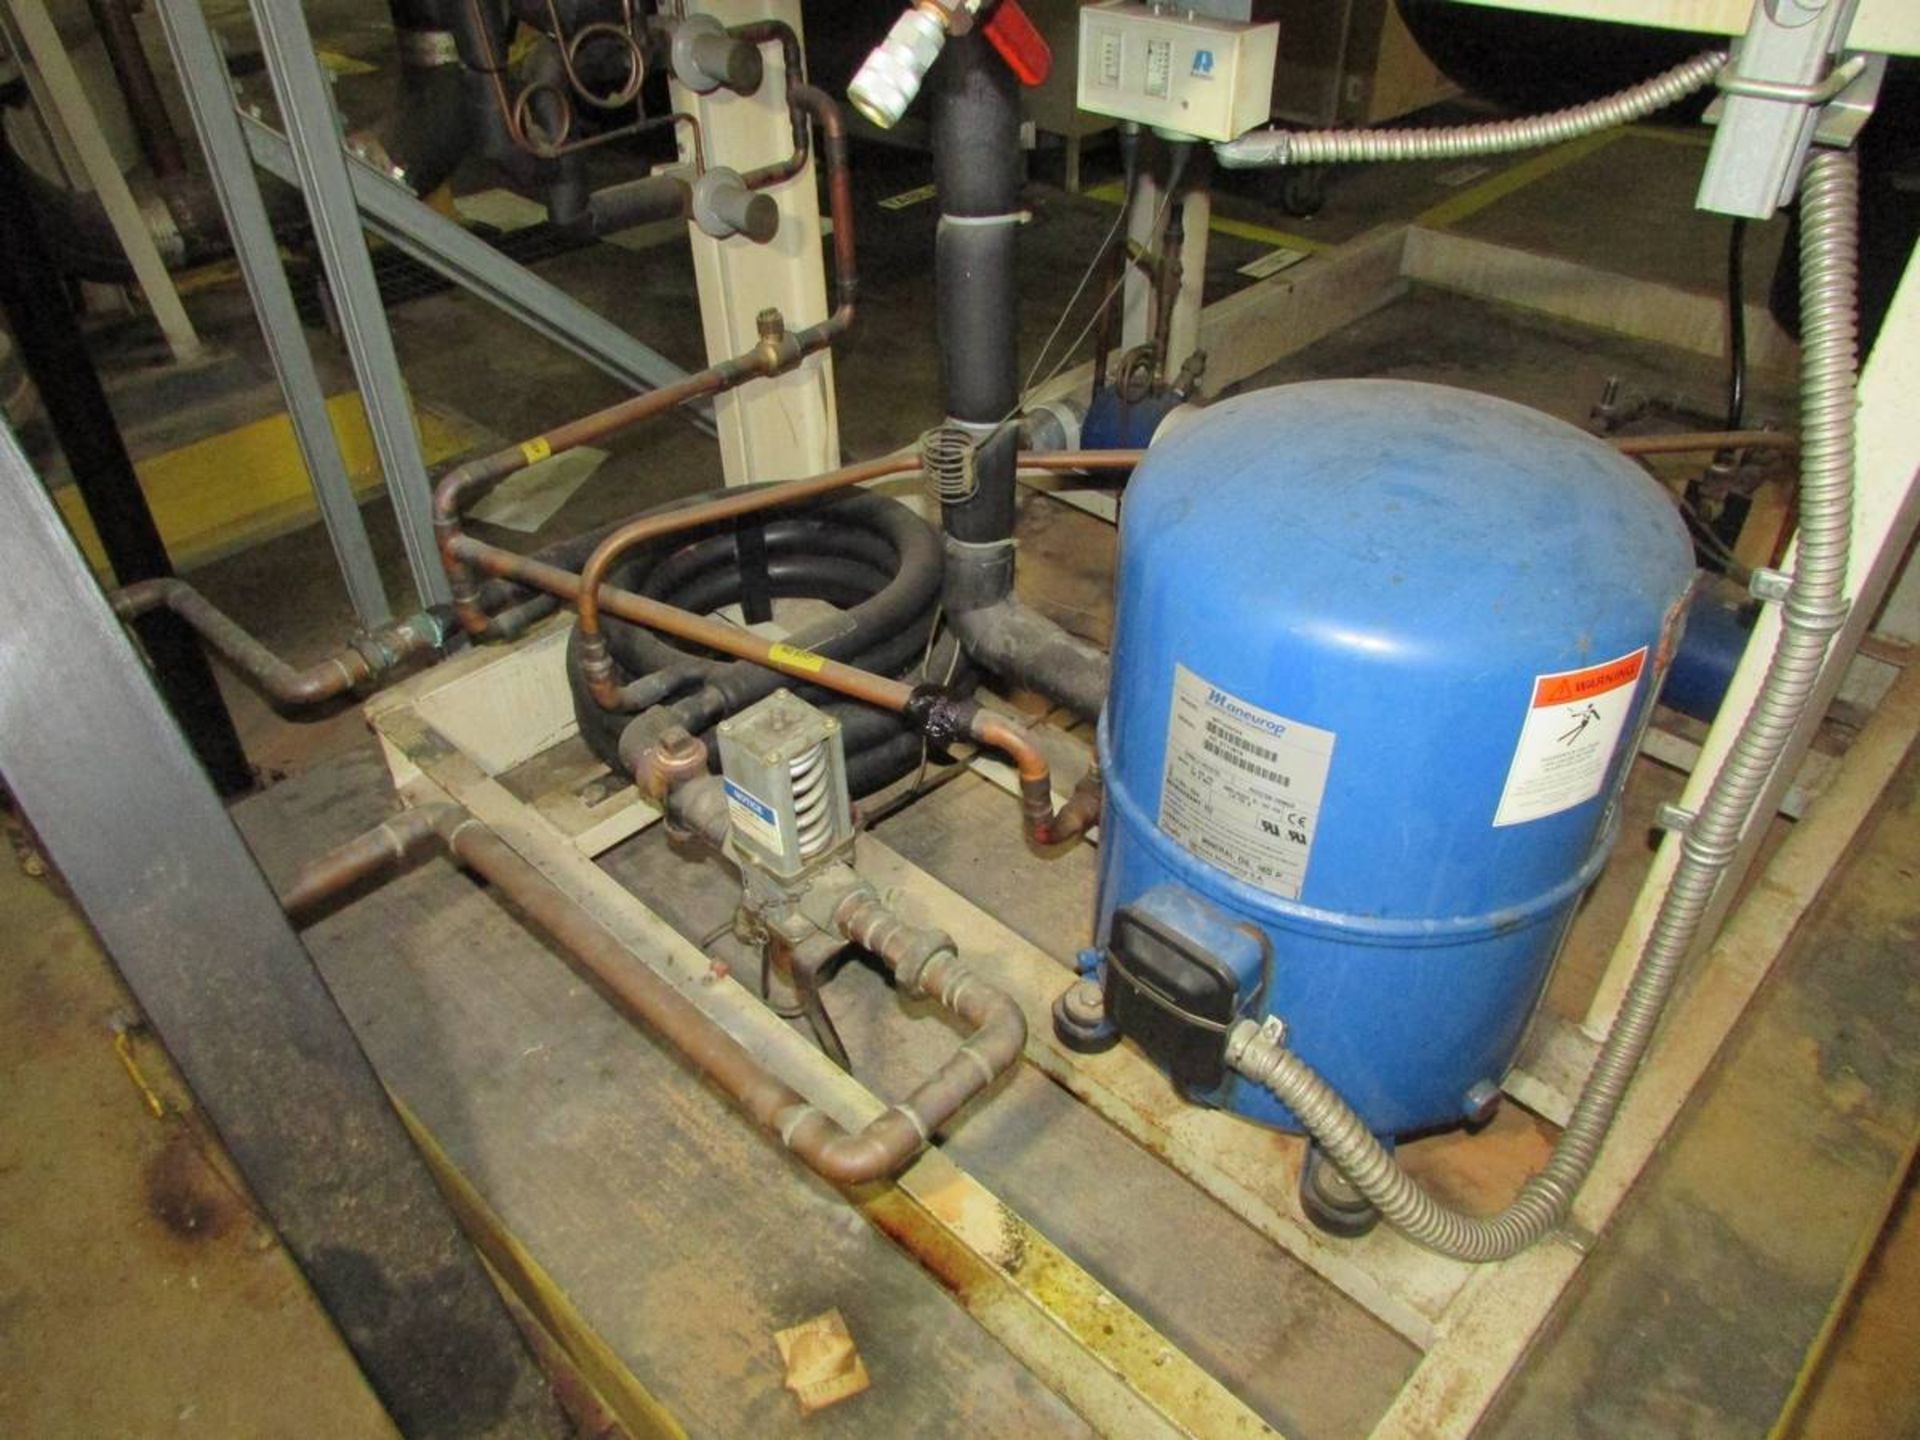 2000 Ingersoll Rand DXR2500W-SP3 Refrigerated Compressed Air Dryer - Image 3 of 10